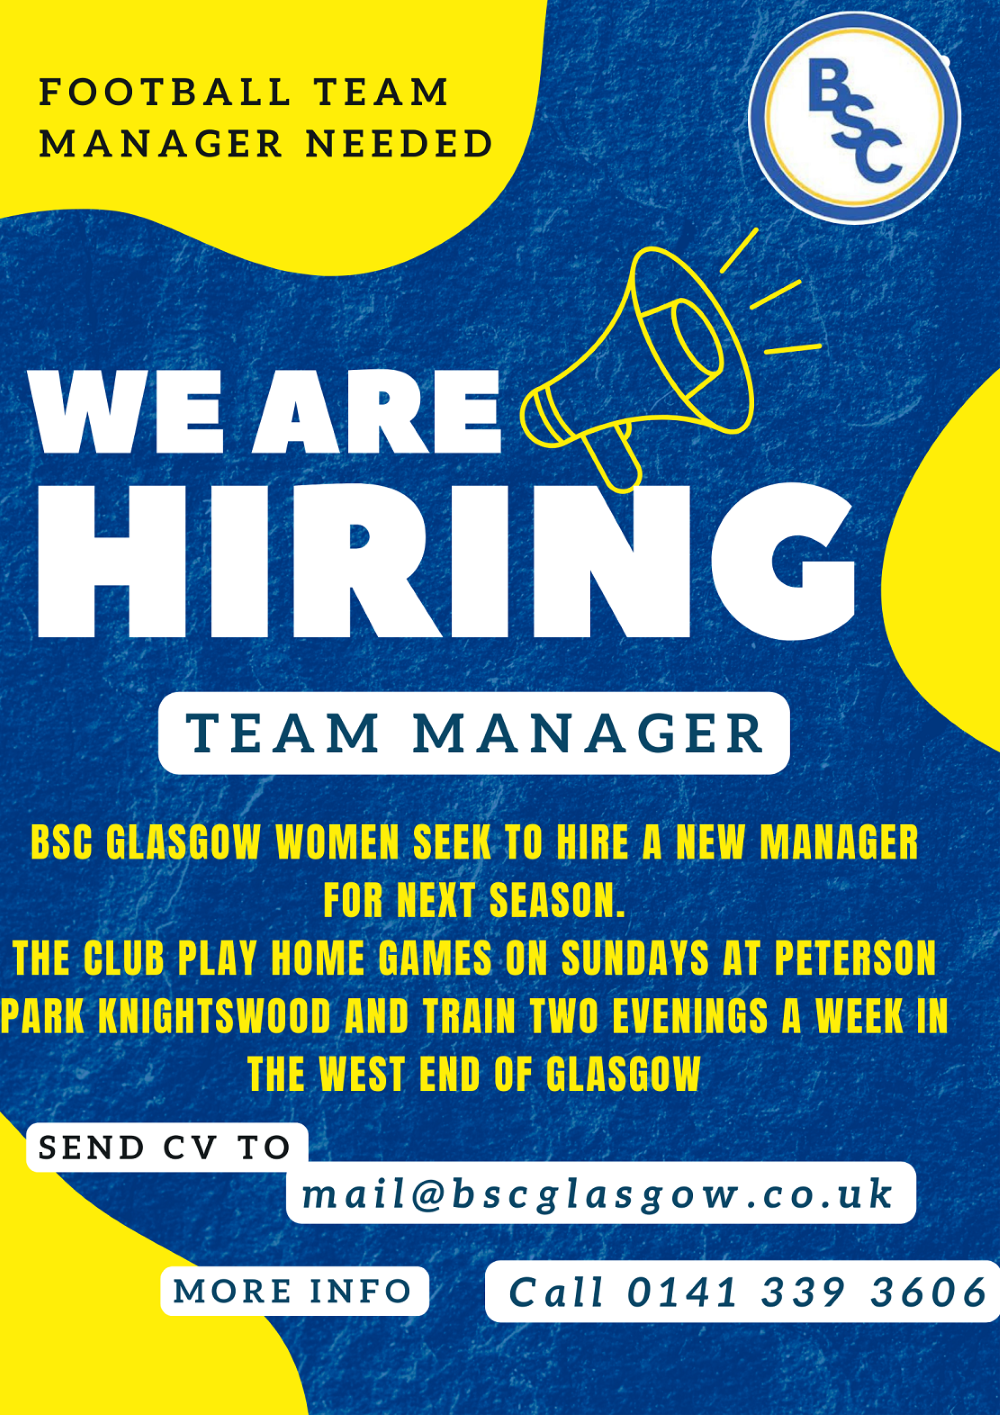 Head coach and manager wanted Image